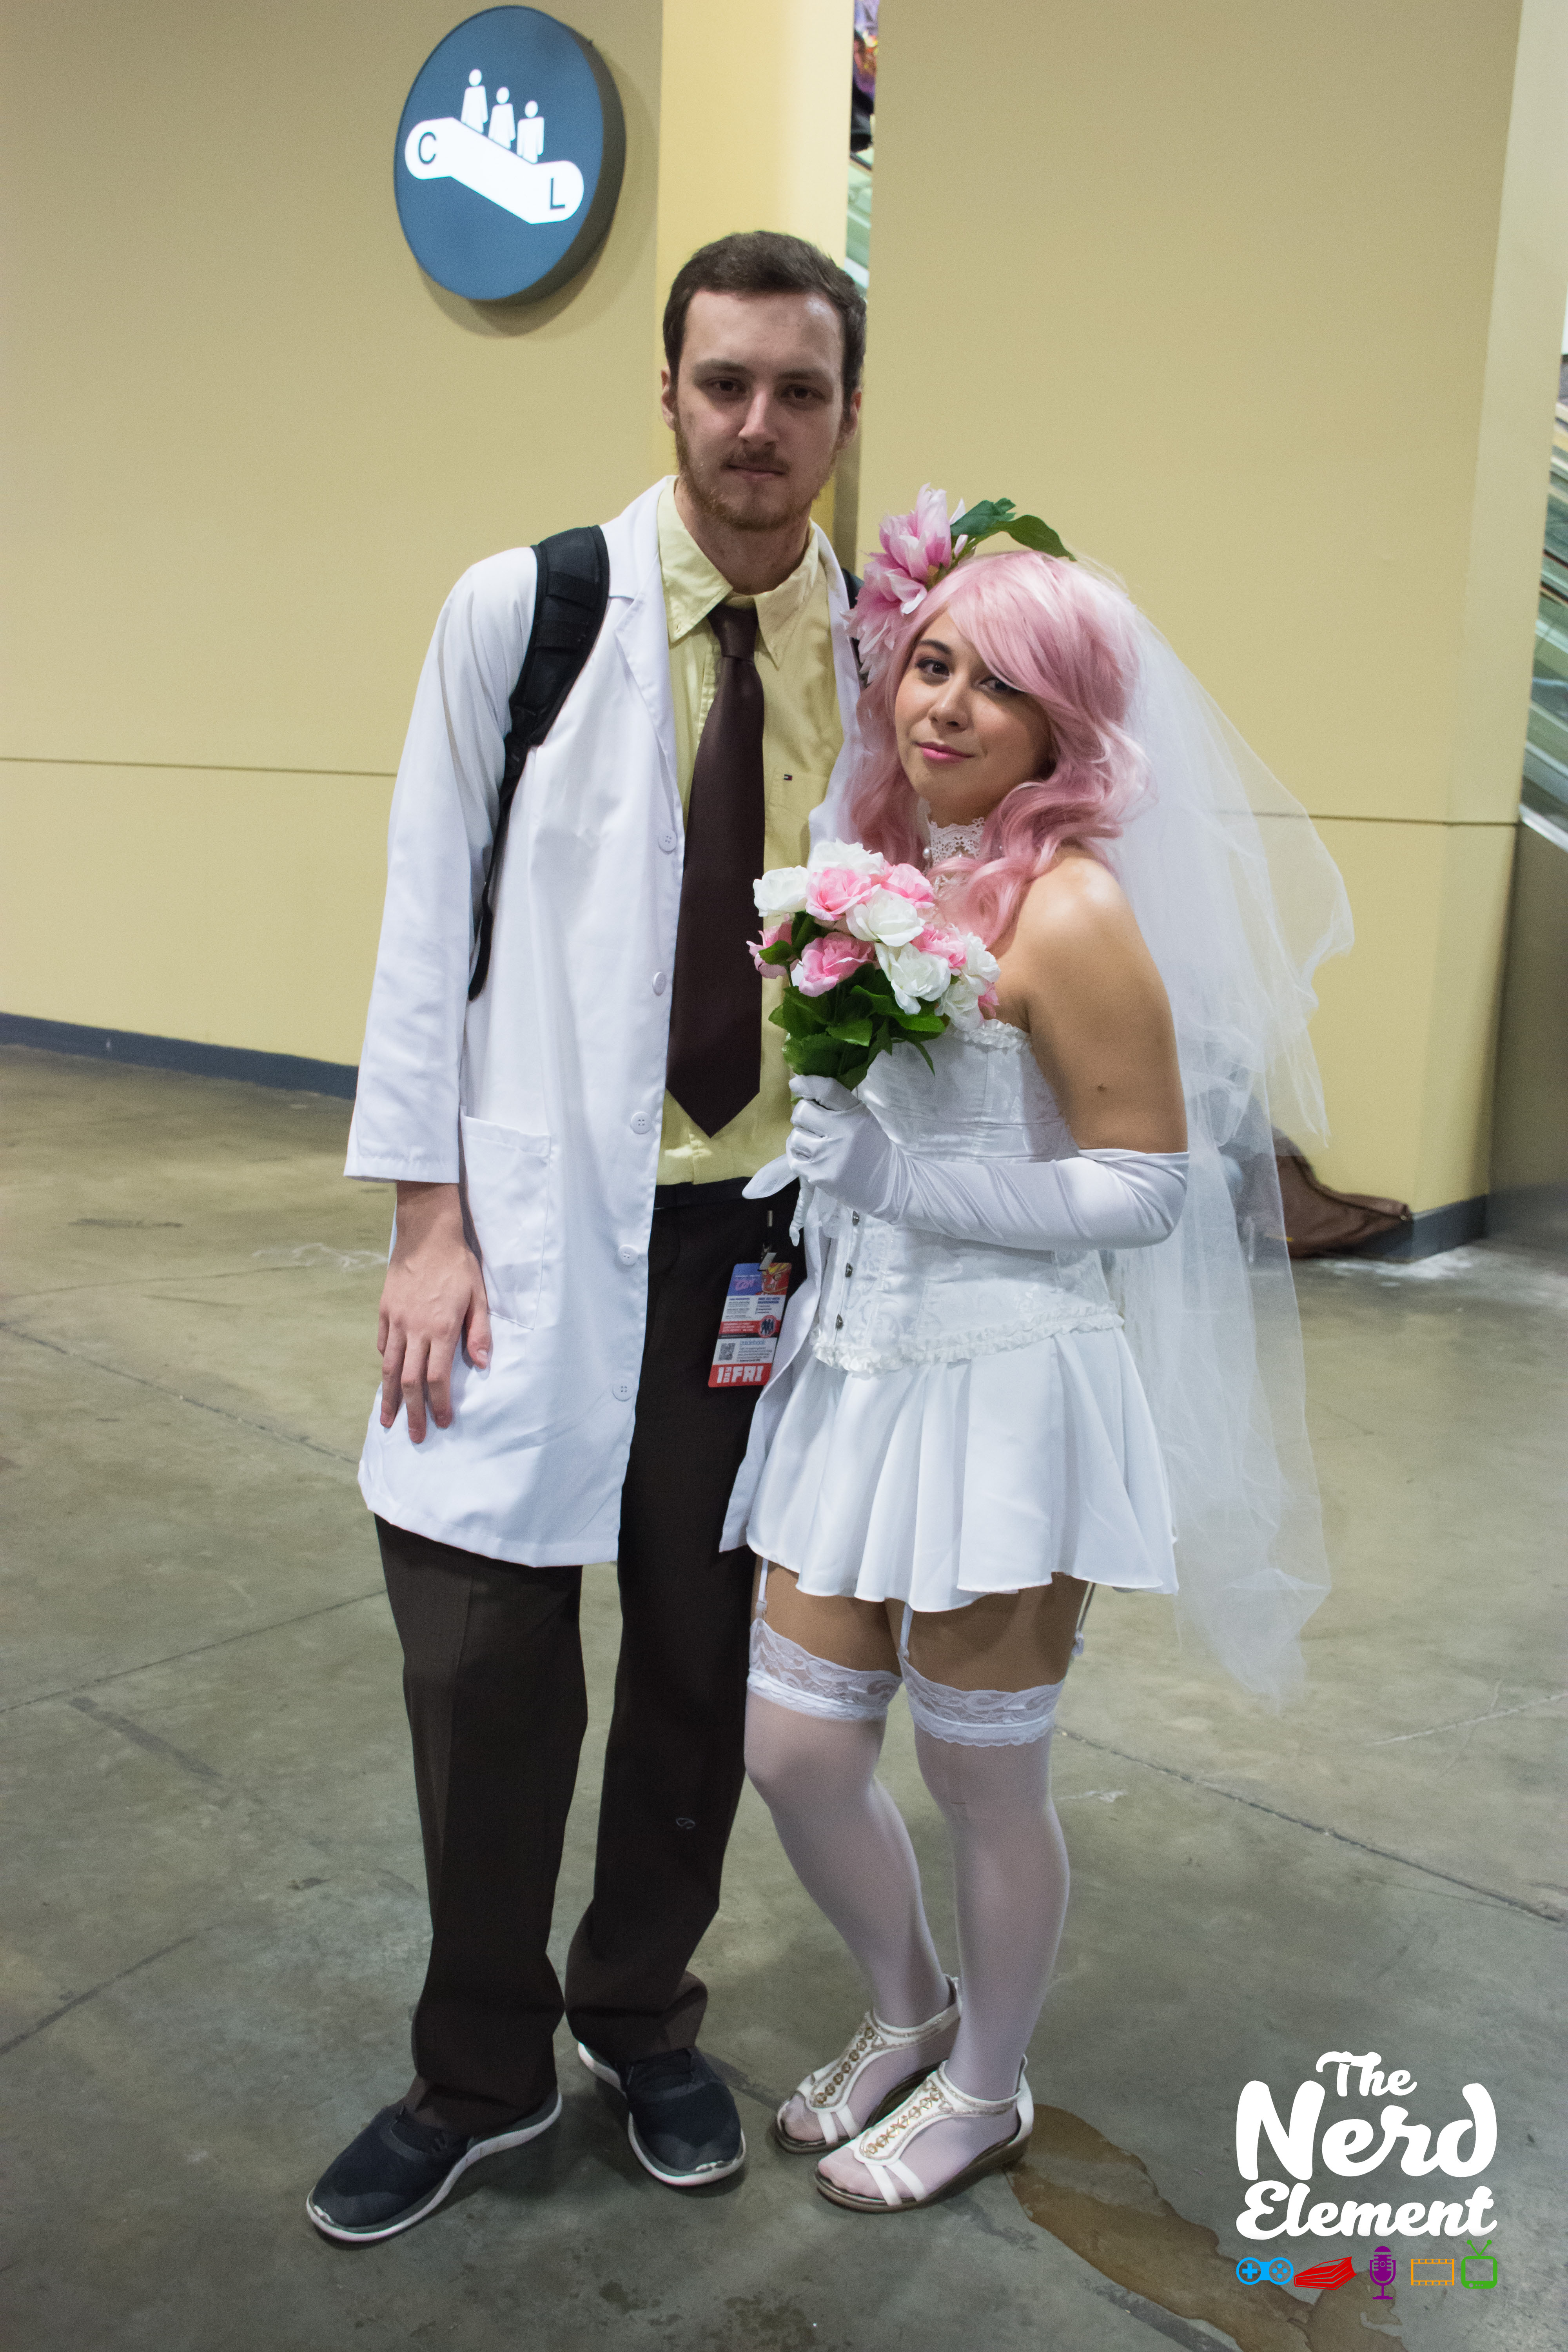 Dr. Krieger and Kimiko (IG: daniskycosplay)
Archer series